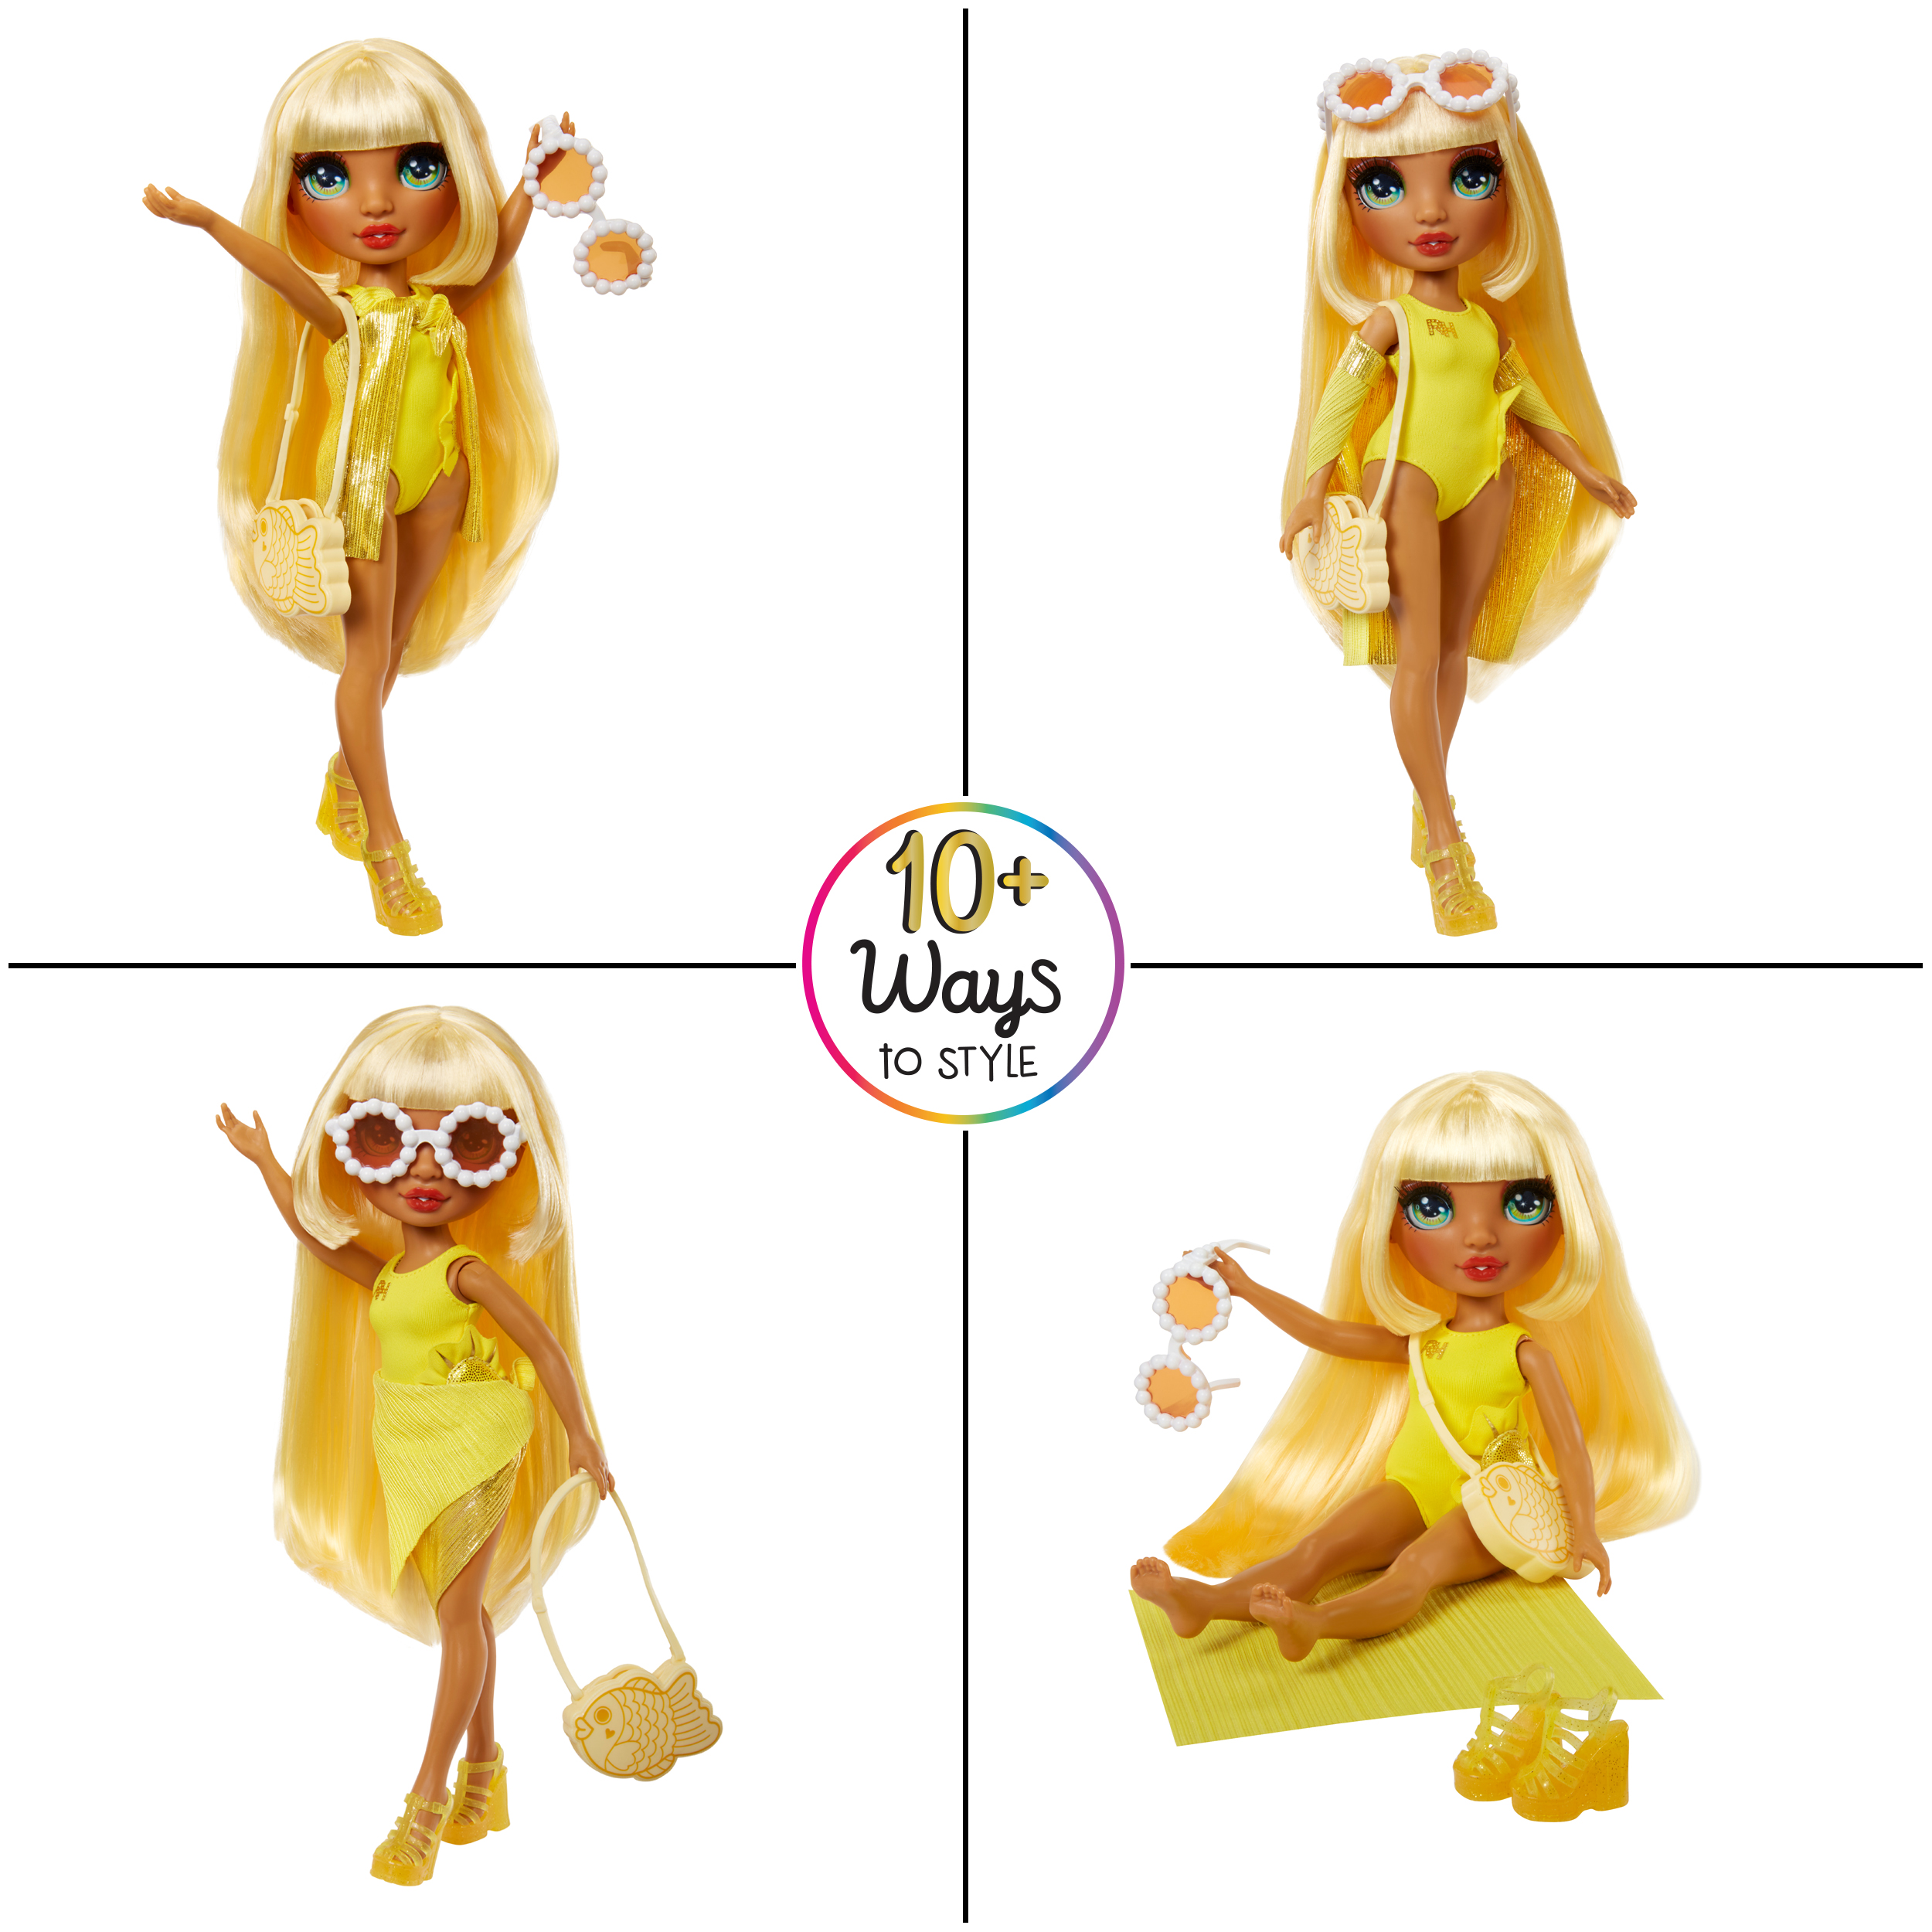 Rainbow High Swim & Style Sunny, Yellow 11? Doll, Removable Swimsuit, Wrap, Sandals, Fun Play Accessories. Kids Toy Gift Ages 4-12 - image 5 of 8